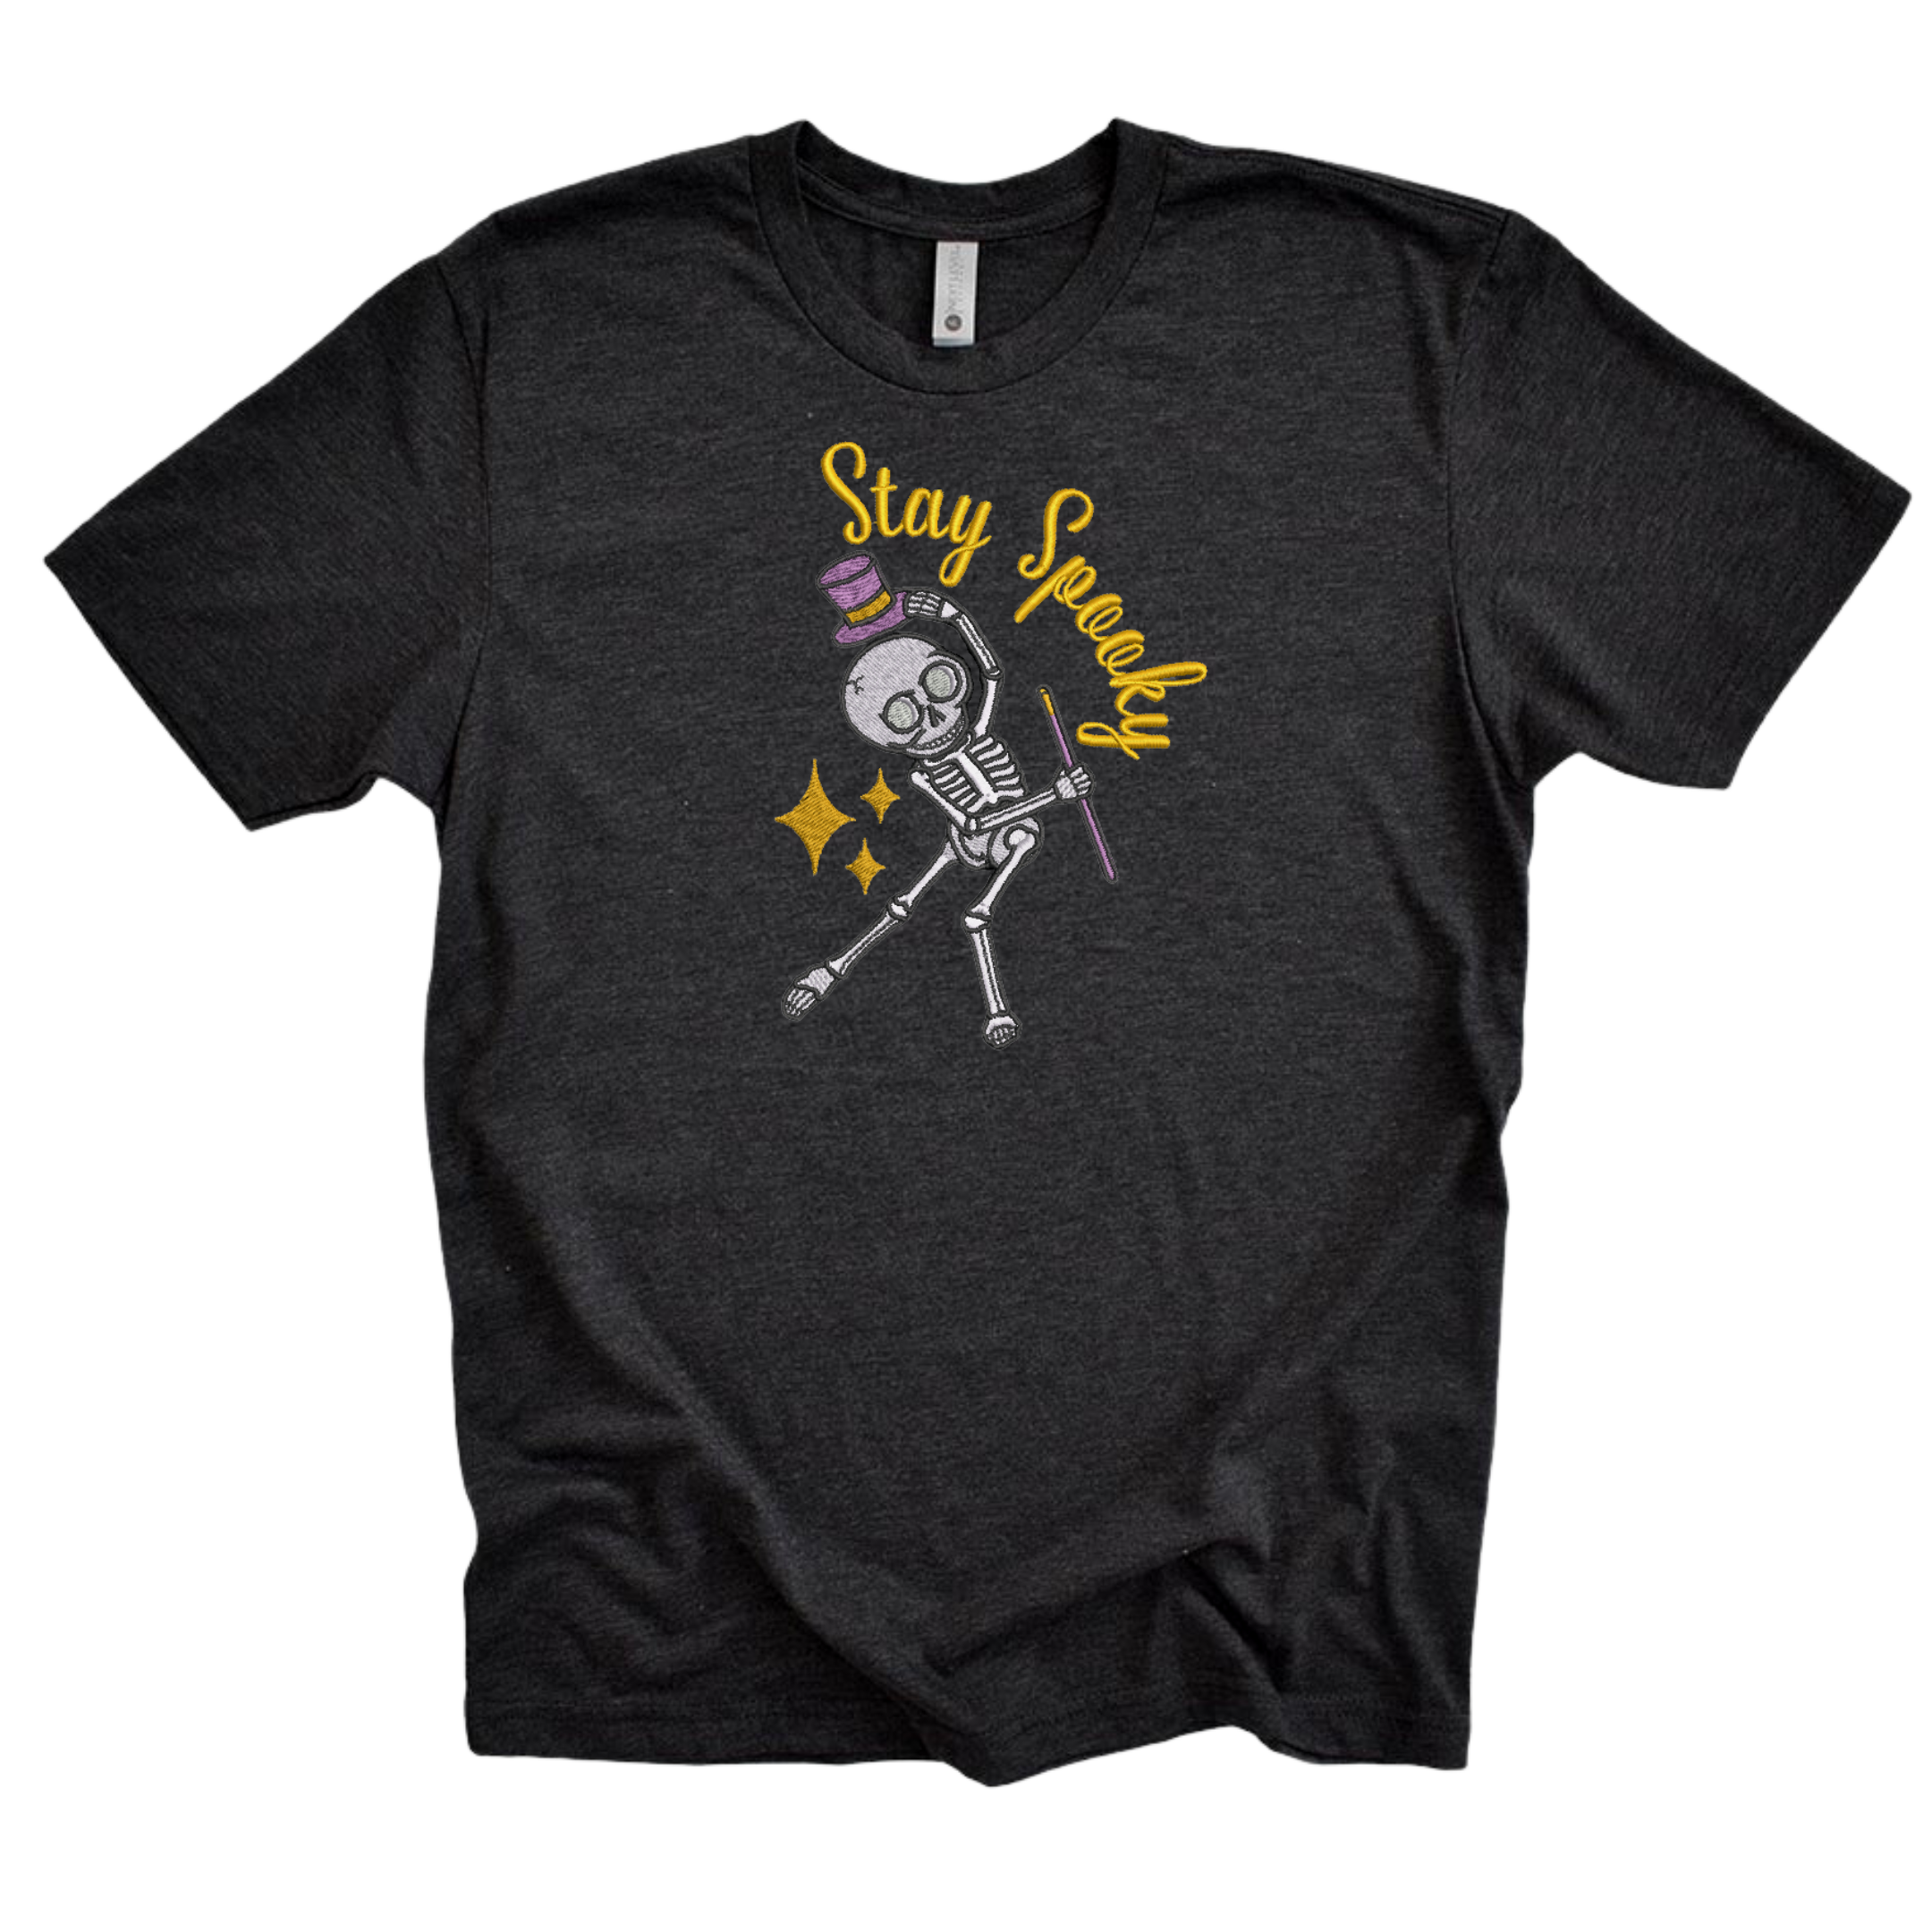 Stay Spooky Embroidered Black Tee Shirt Unisex